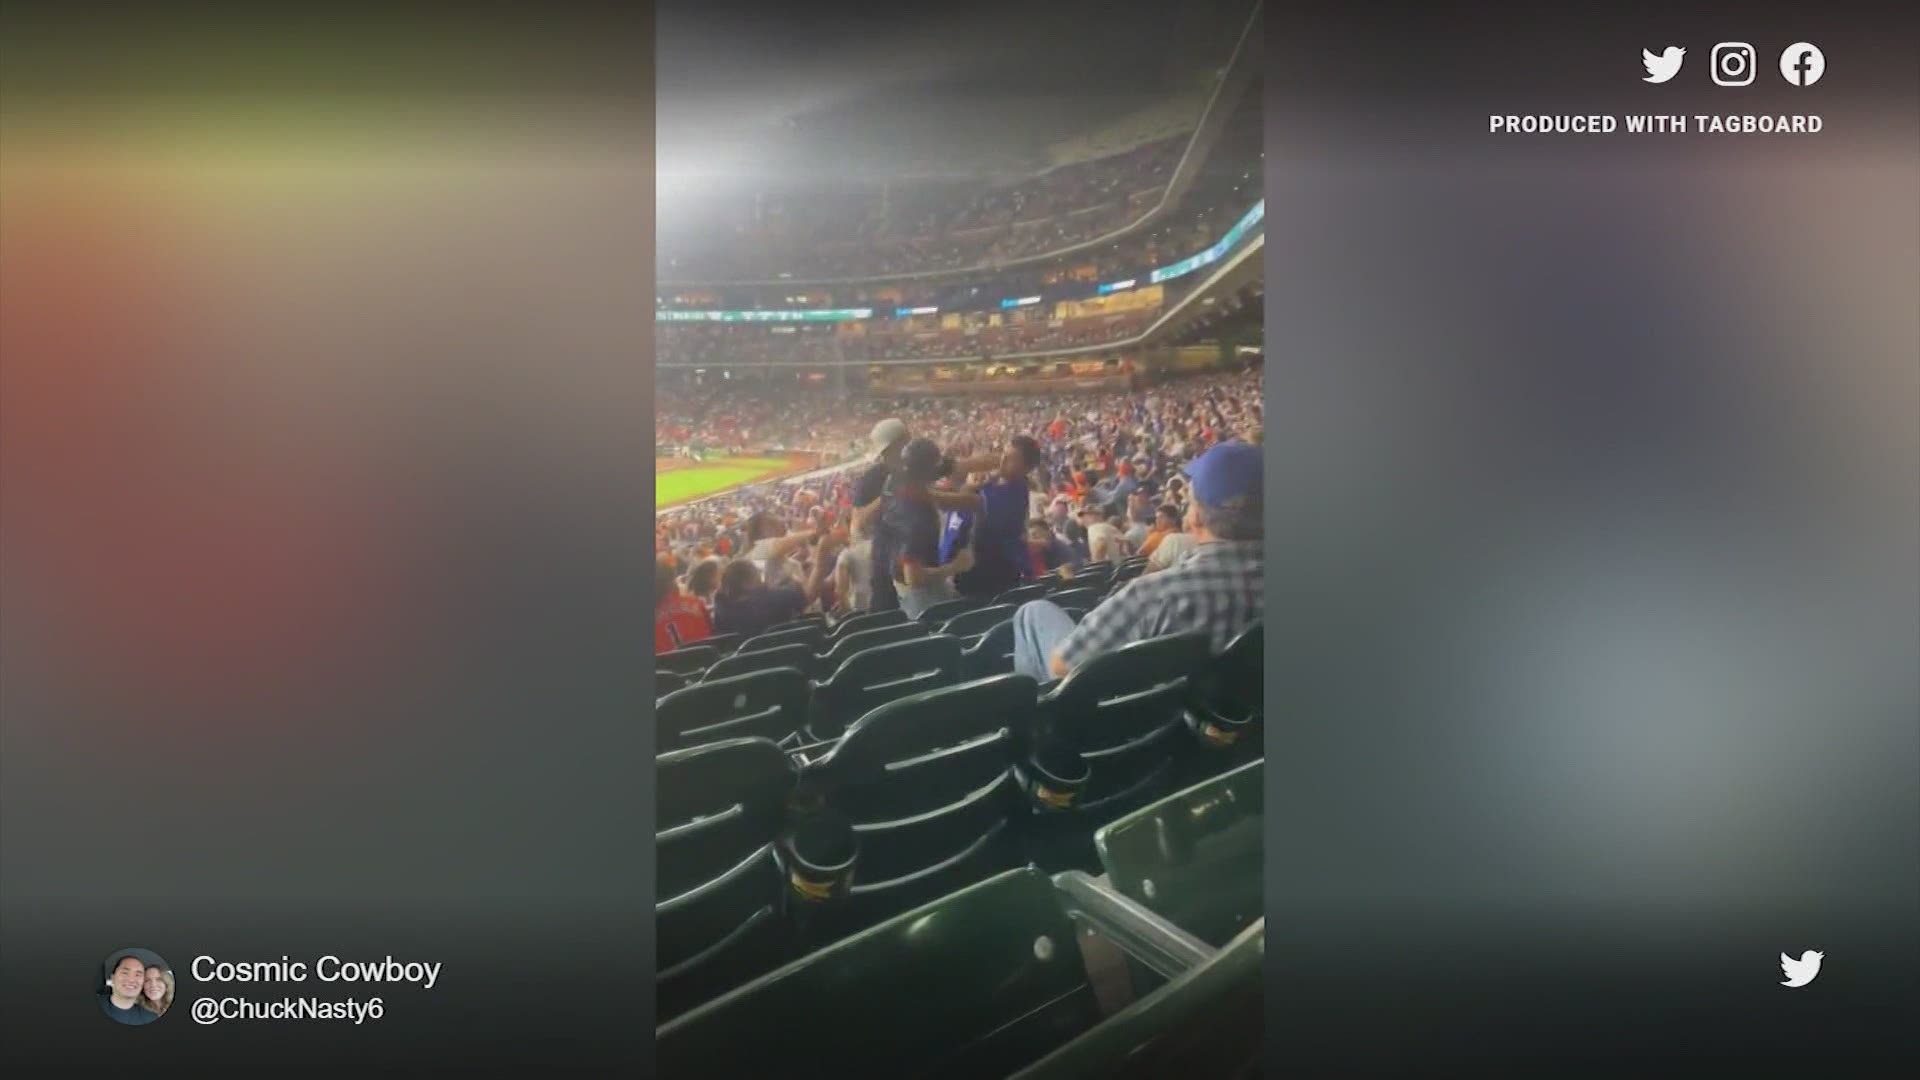 Three people were cited after a fight broke out Wednesday night during the Astros-Dodgers game at Minute Maid Park.